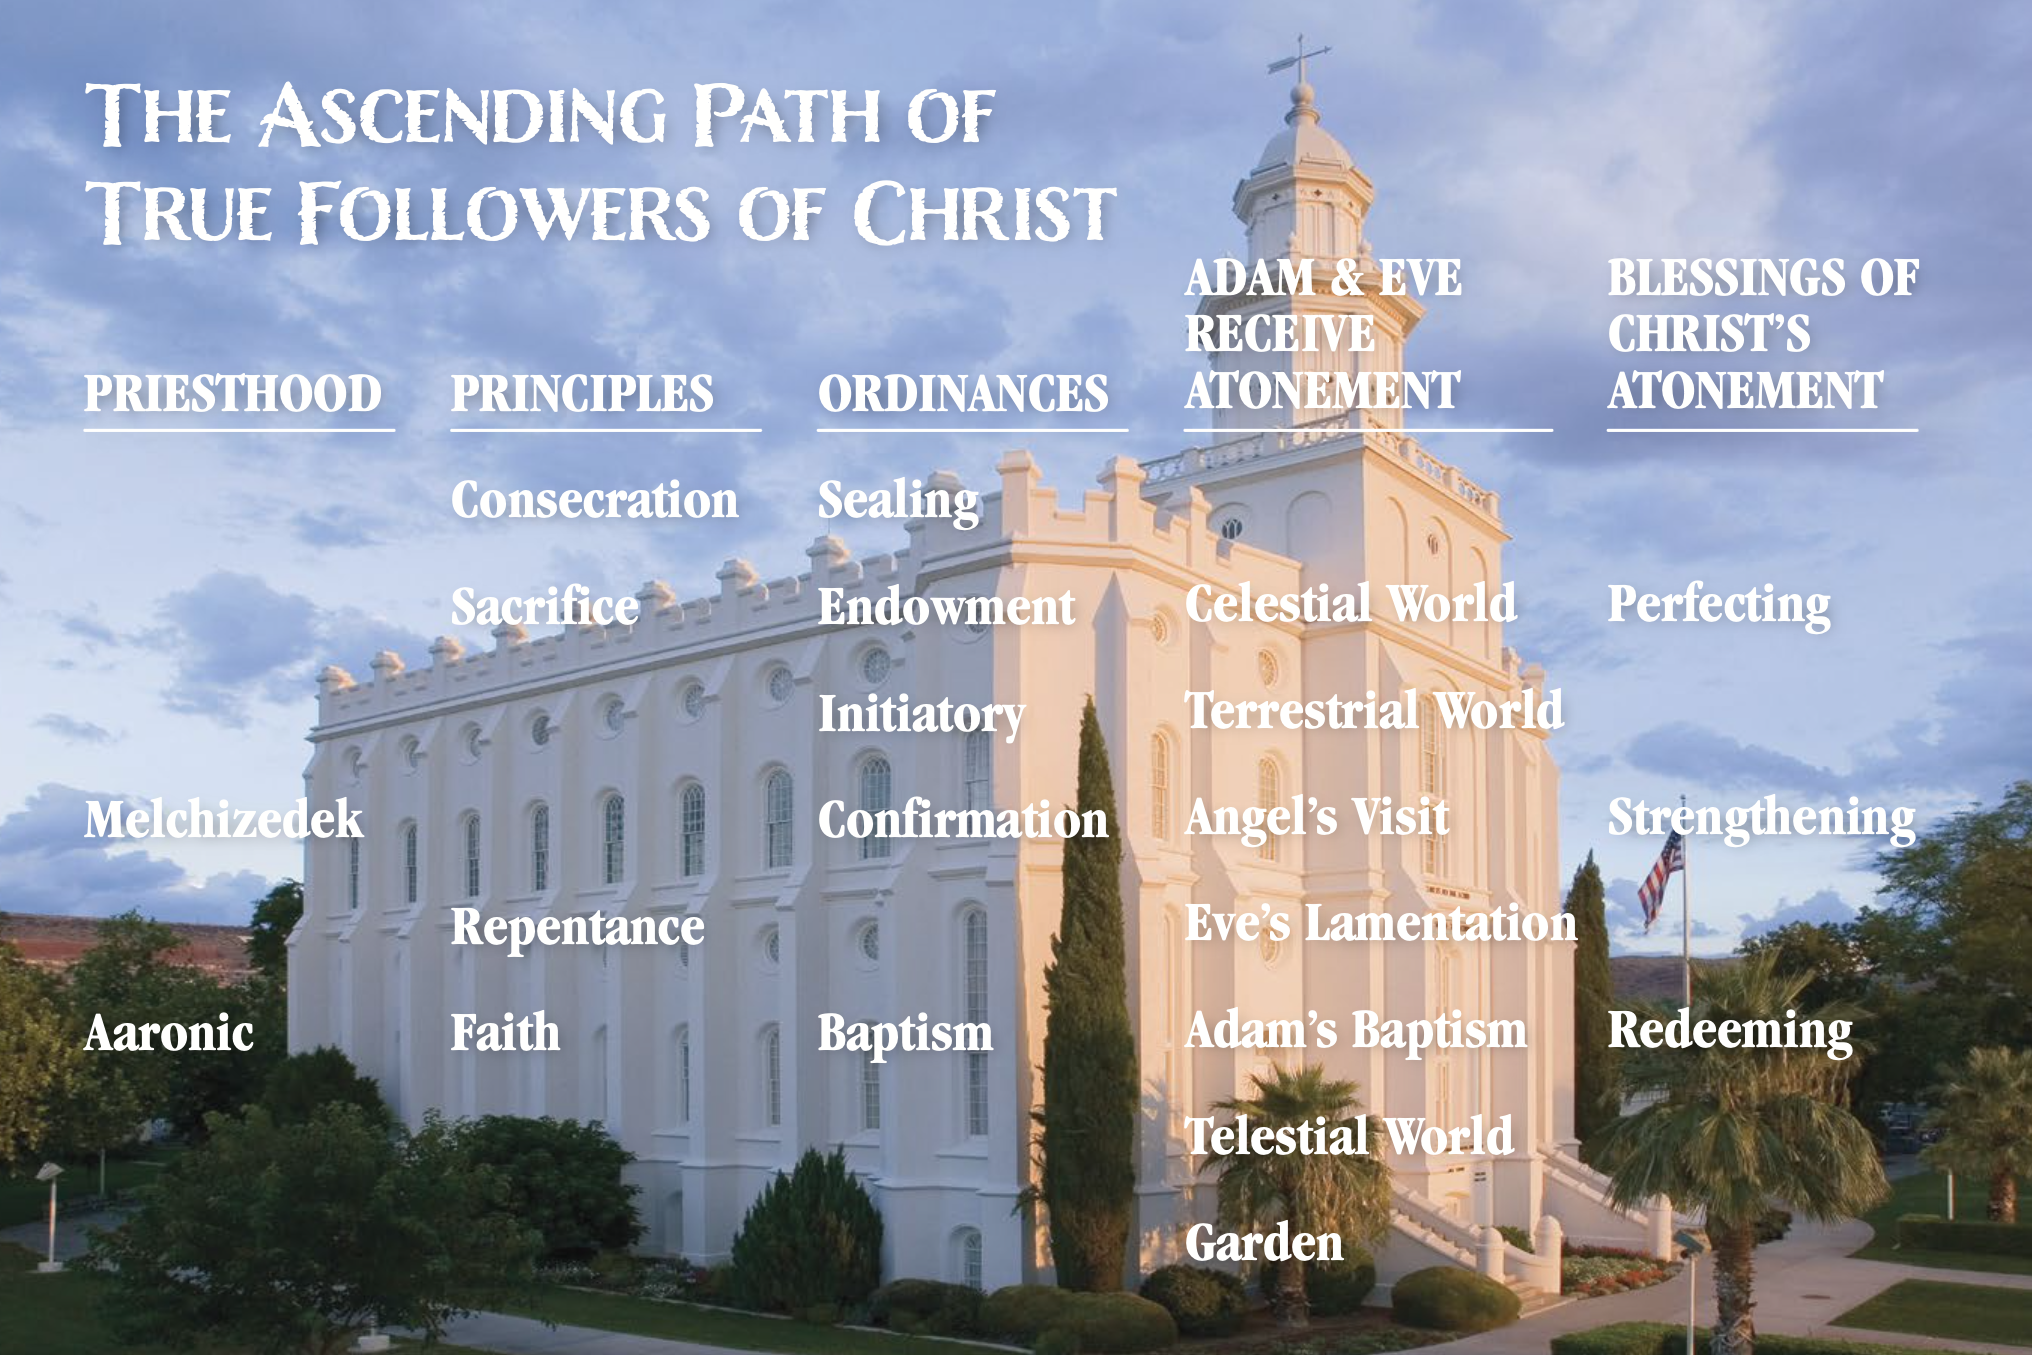 The Ascending Path of True Followers of Christ, Shown Against the Backdrop of the St. George Utah Temple.